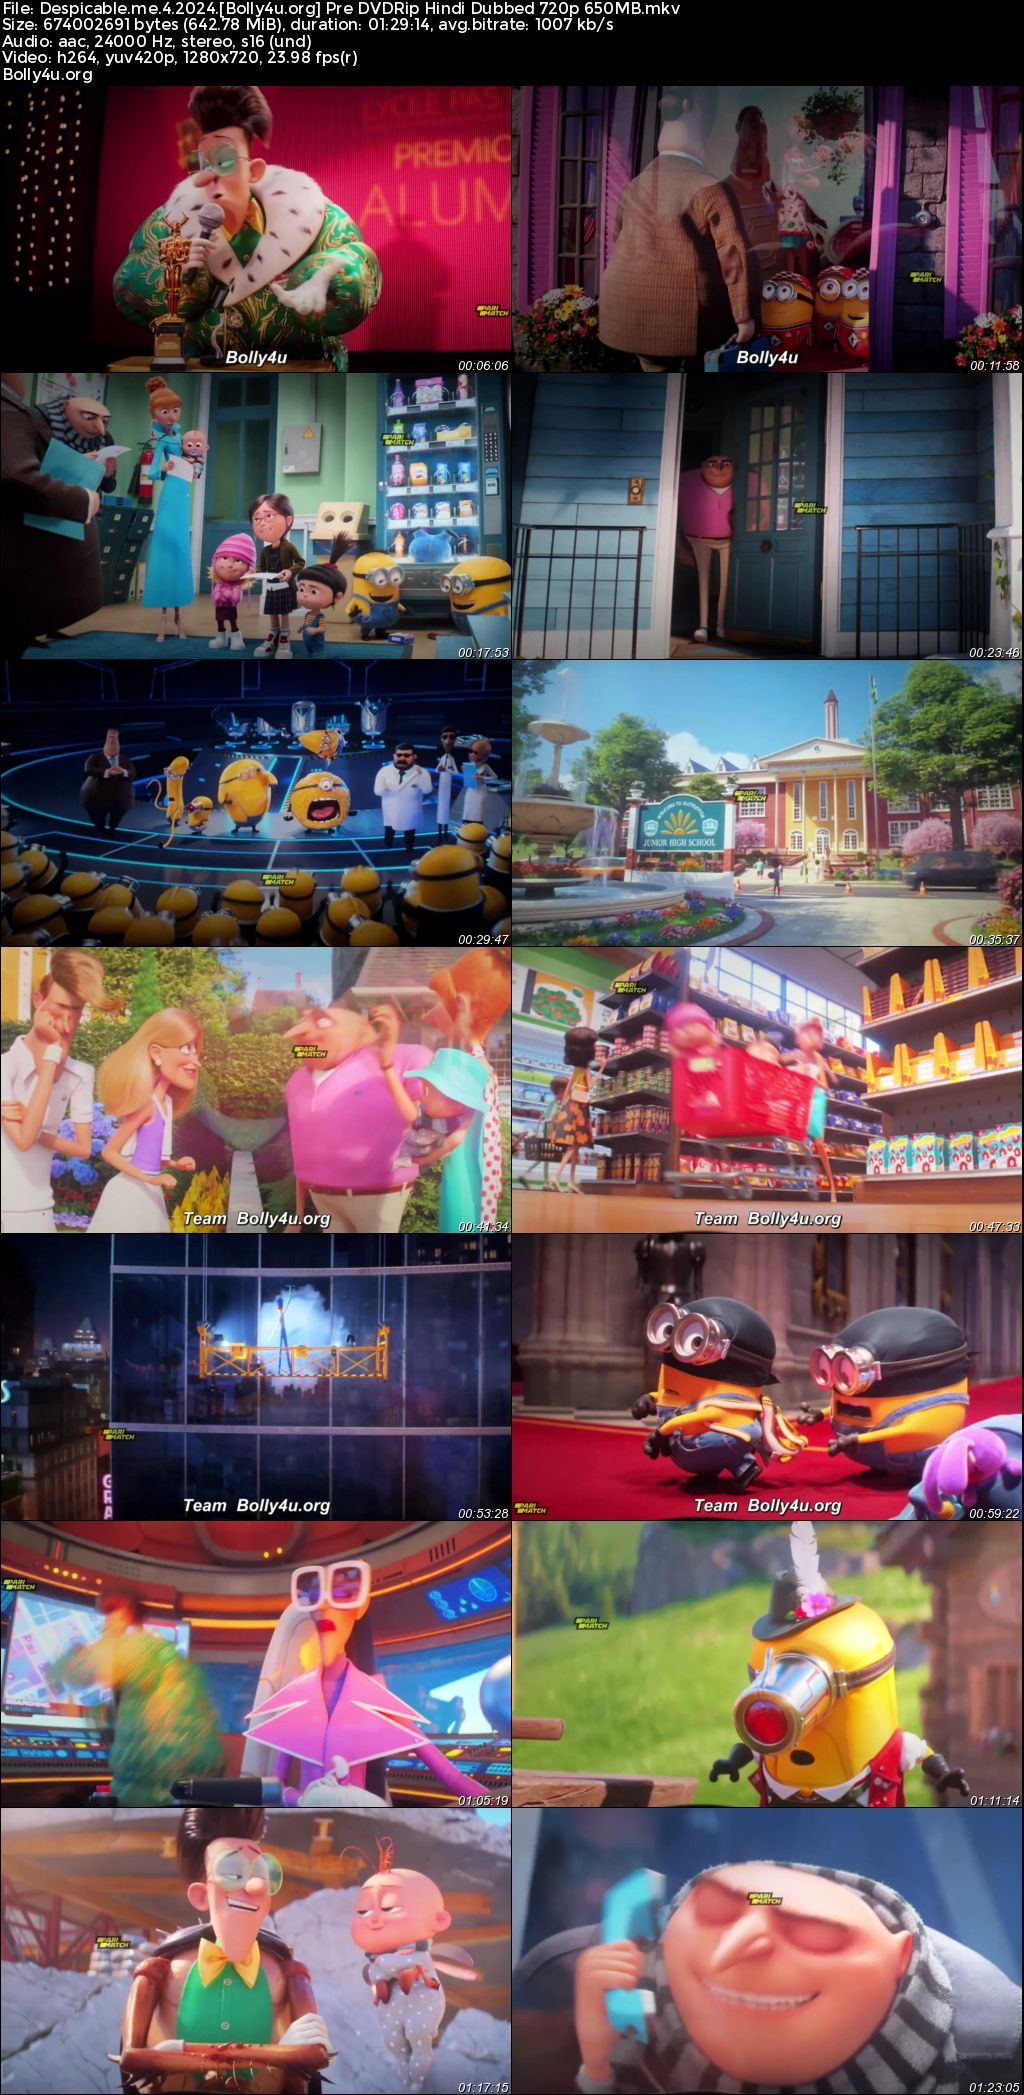 Despicable Me 4 2024 Pre DVDRip Hindi Dubbed Full Movie Download 1080p 720p 480p